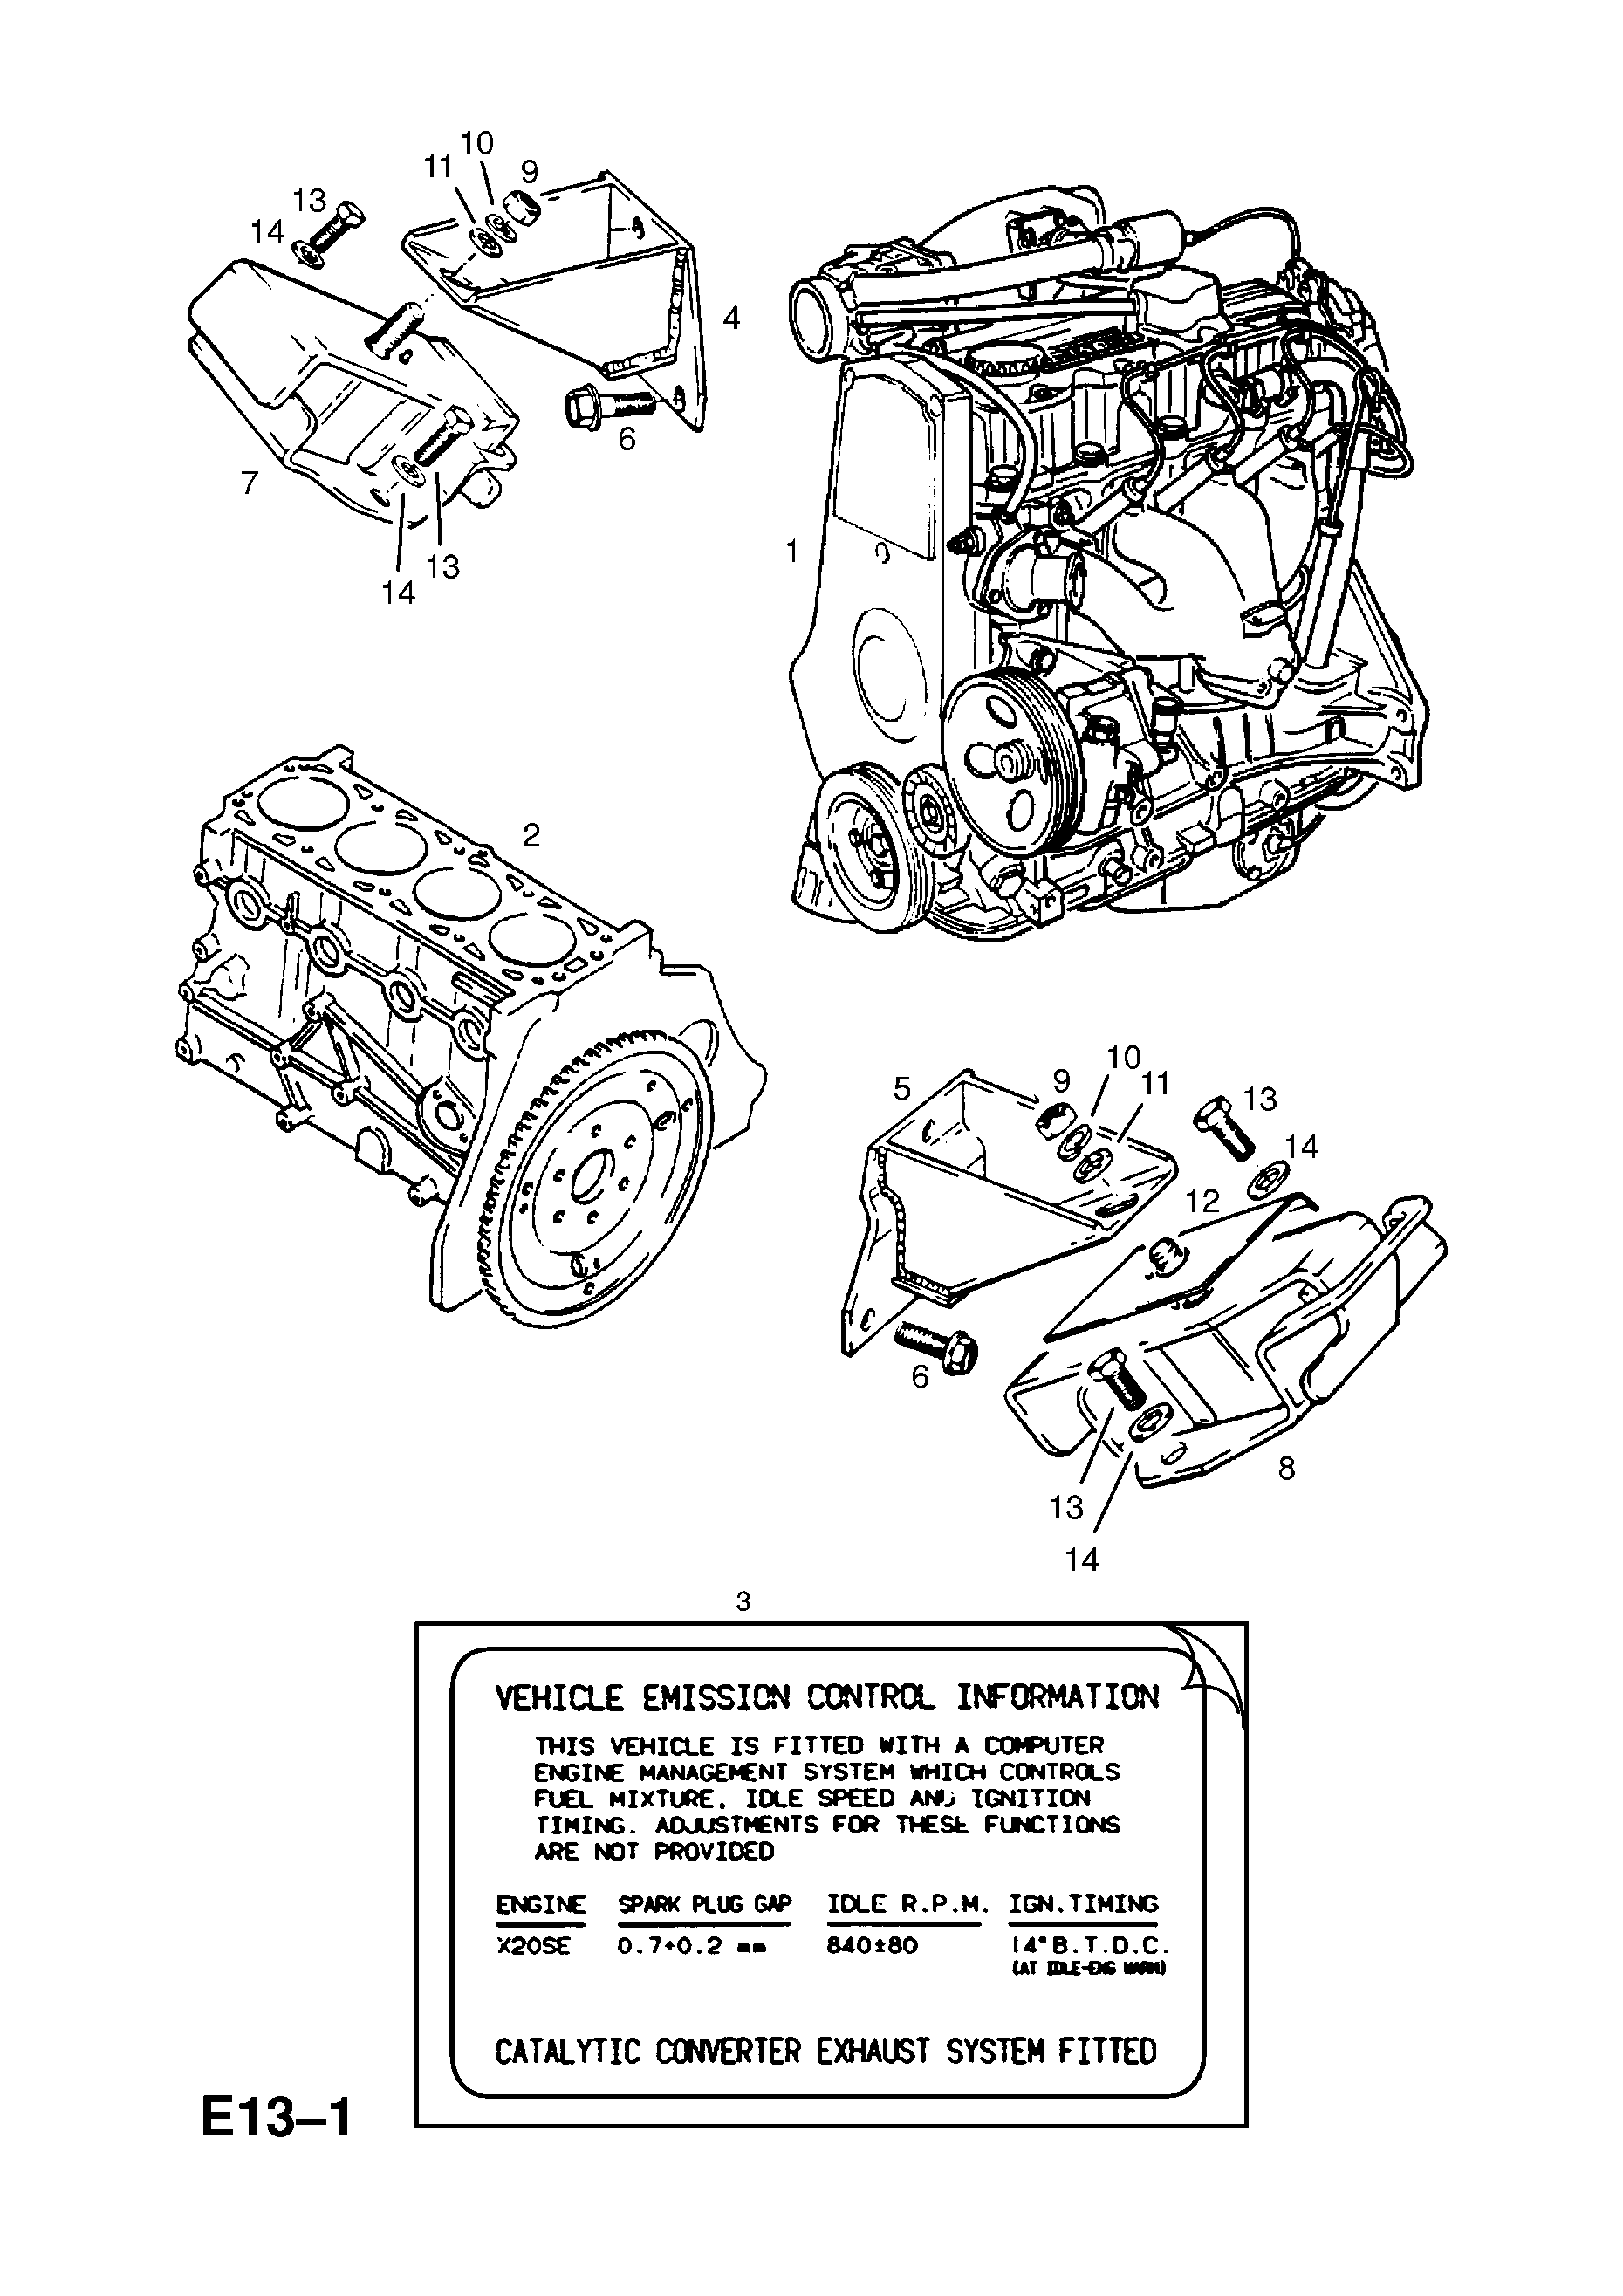 SHORT MOTOR (EXCHANGE) <small><i>[FOR VAUXHALL]</i></small>